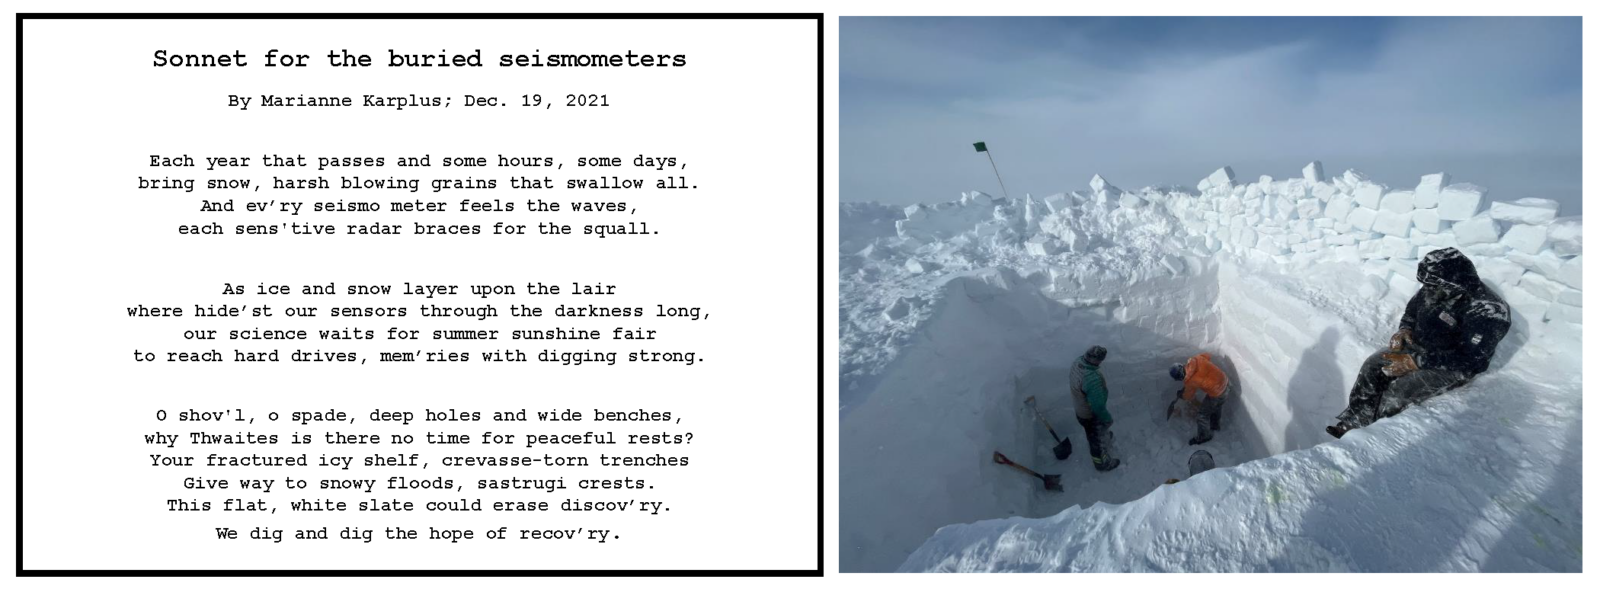 A poem on the right and a photo of scientists digging deep into the snow on the left.